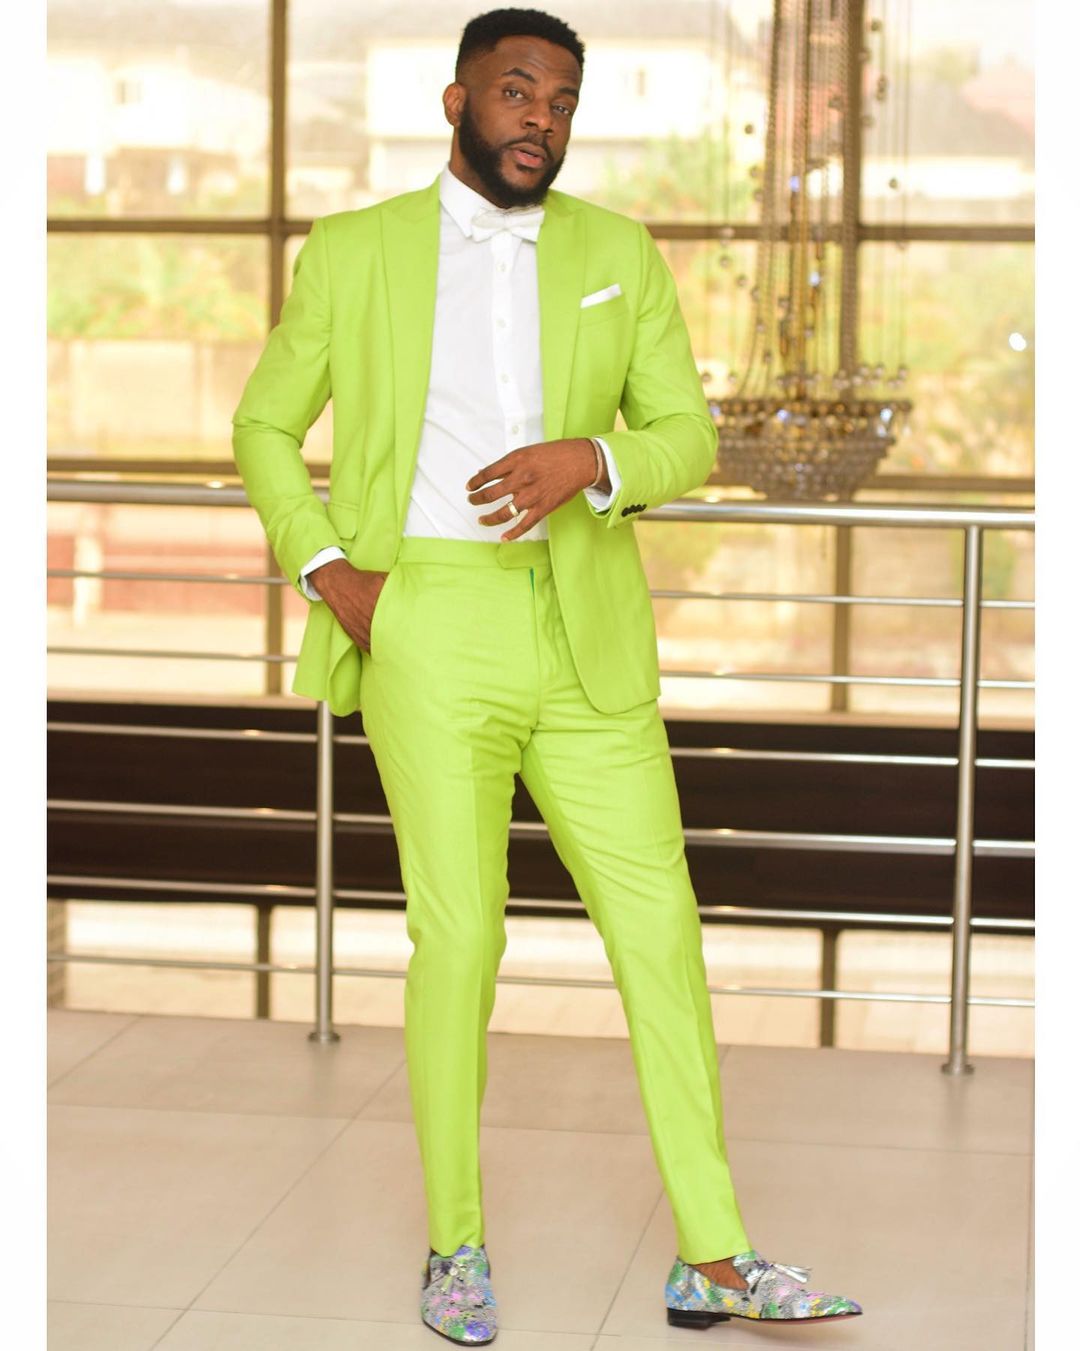 male-celebrities-africa-decadent-fashion-style-rave